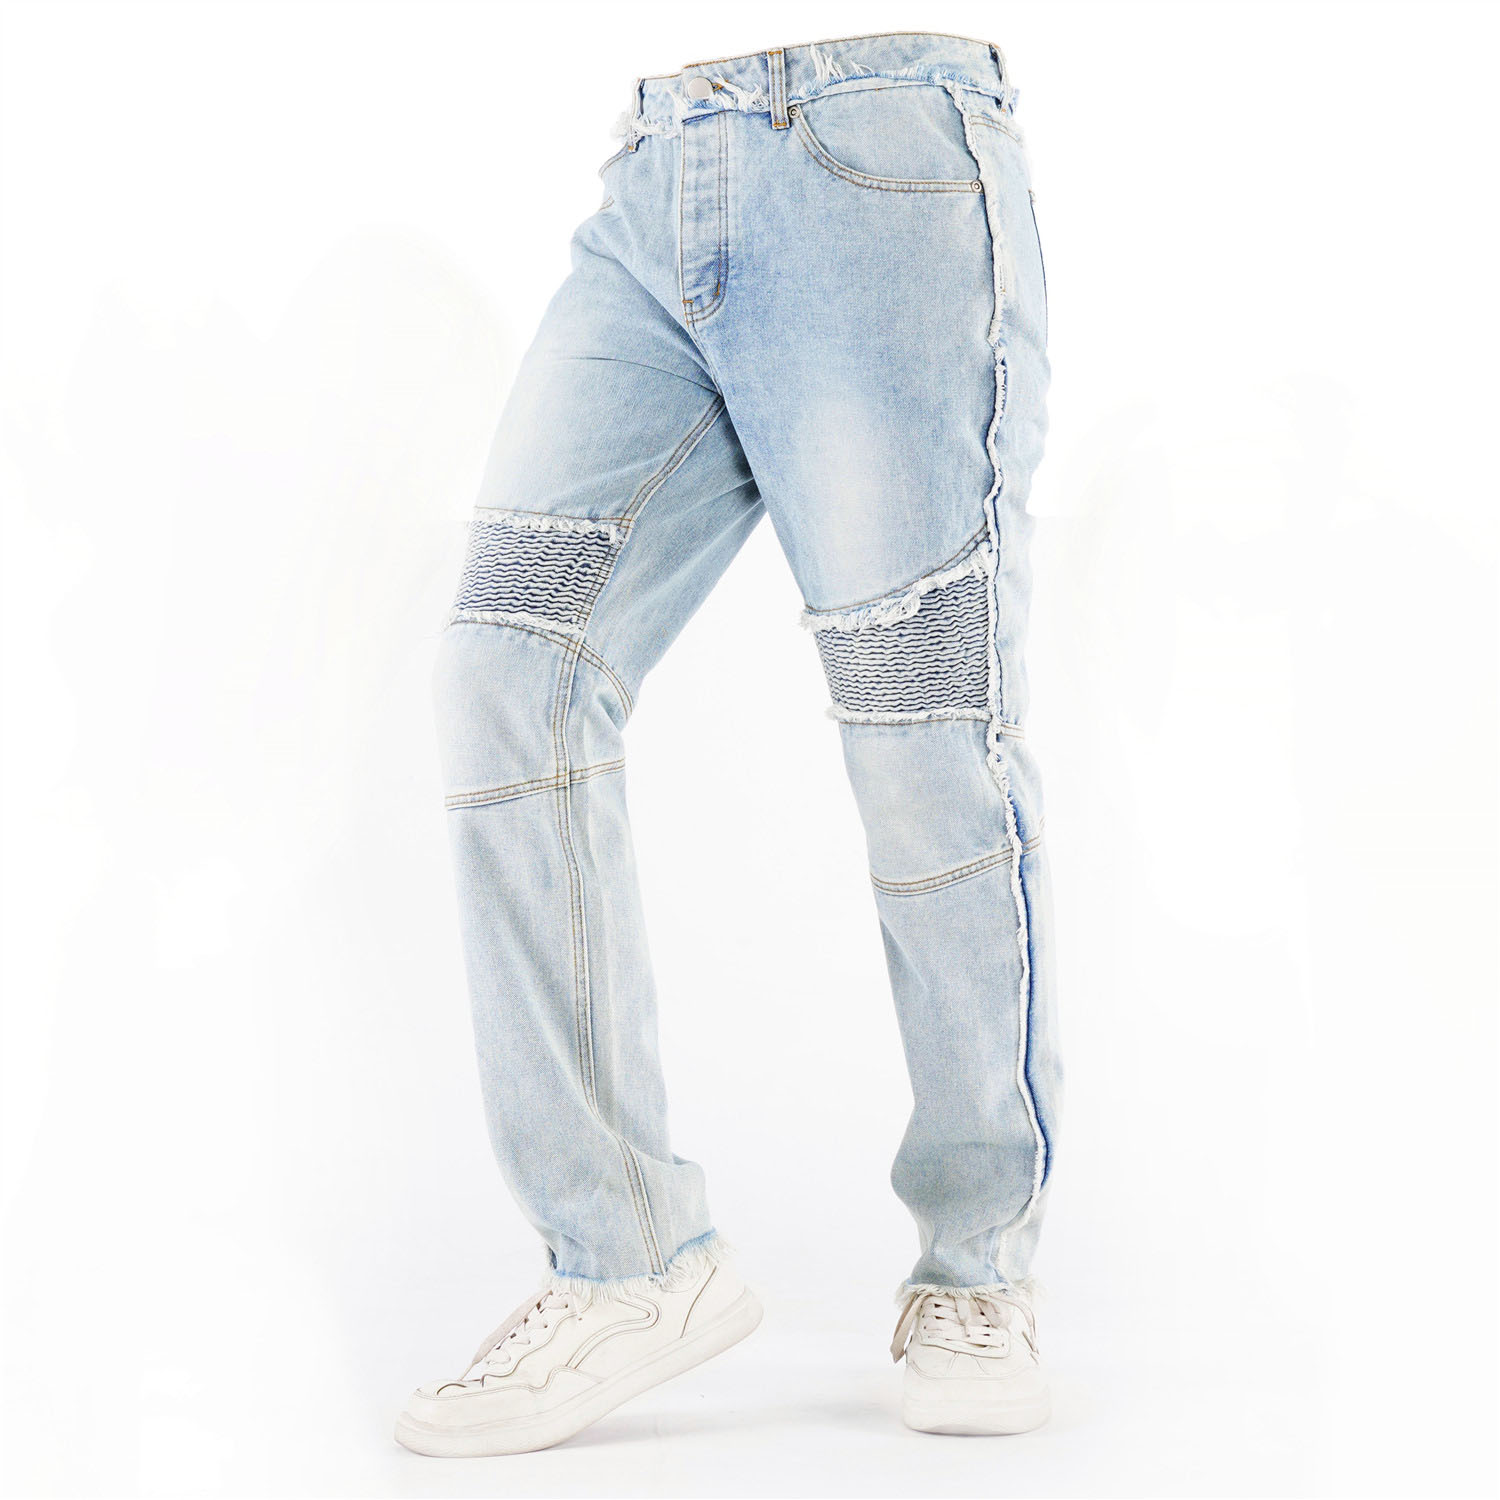 Men's clothing light blue jean pants ripped trousers distressed mens stacked jeans for men